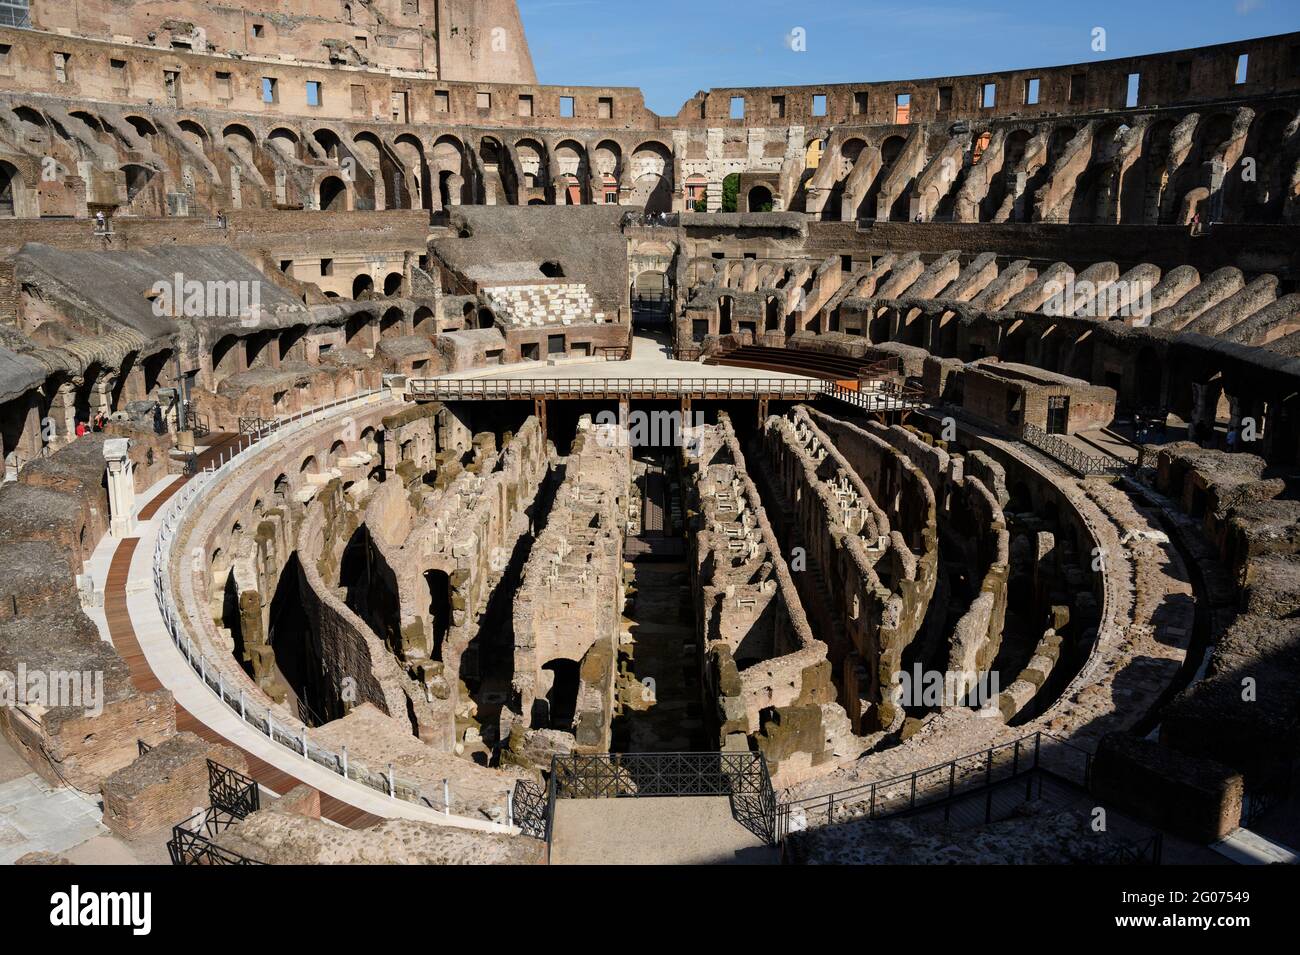 Rome. Italy. Interior view of the Colosseum (Il Colosseo), showing tiered seating and the hypogeum, the elaborate underground structure. Stock Photo